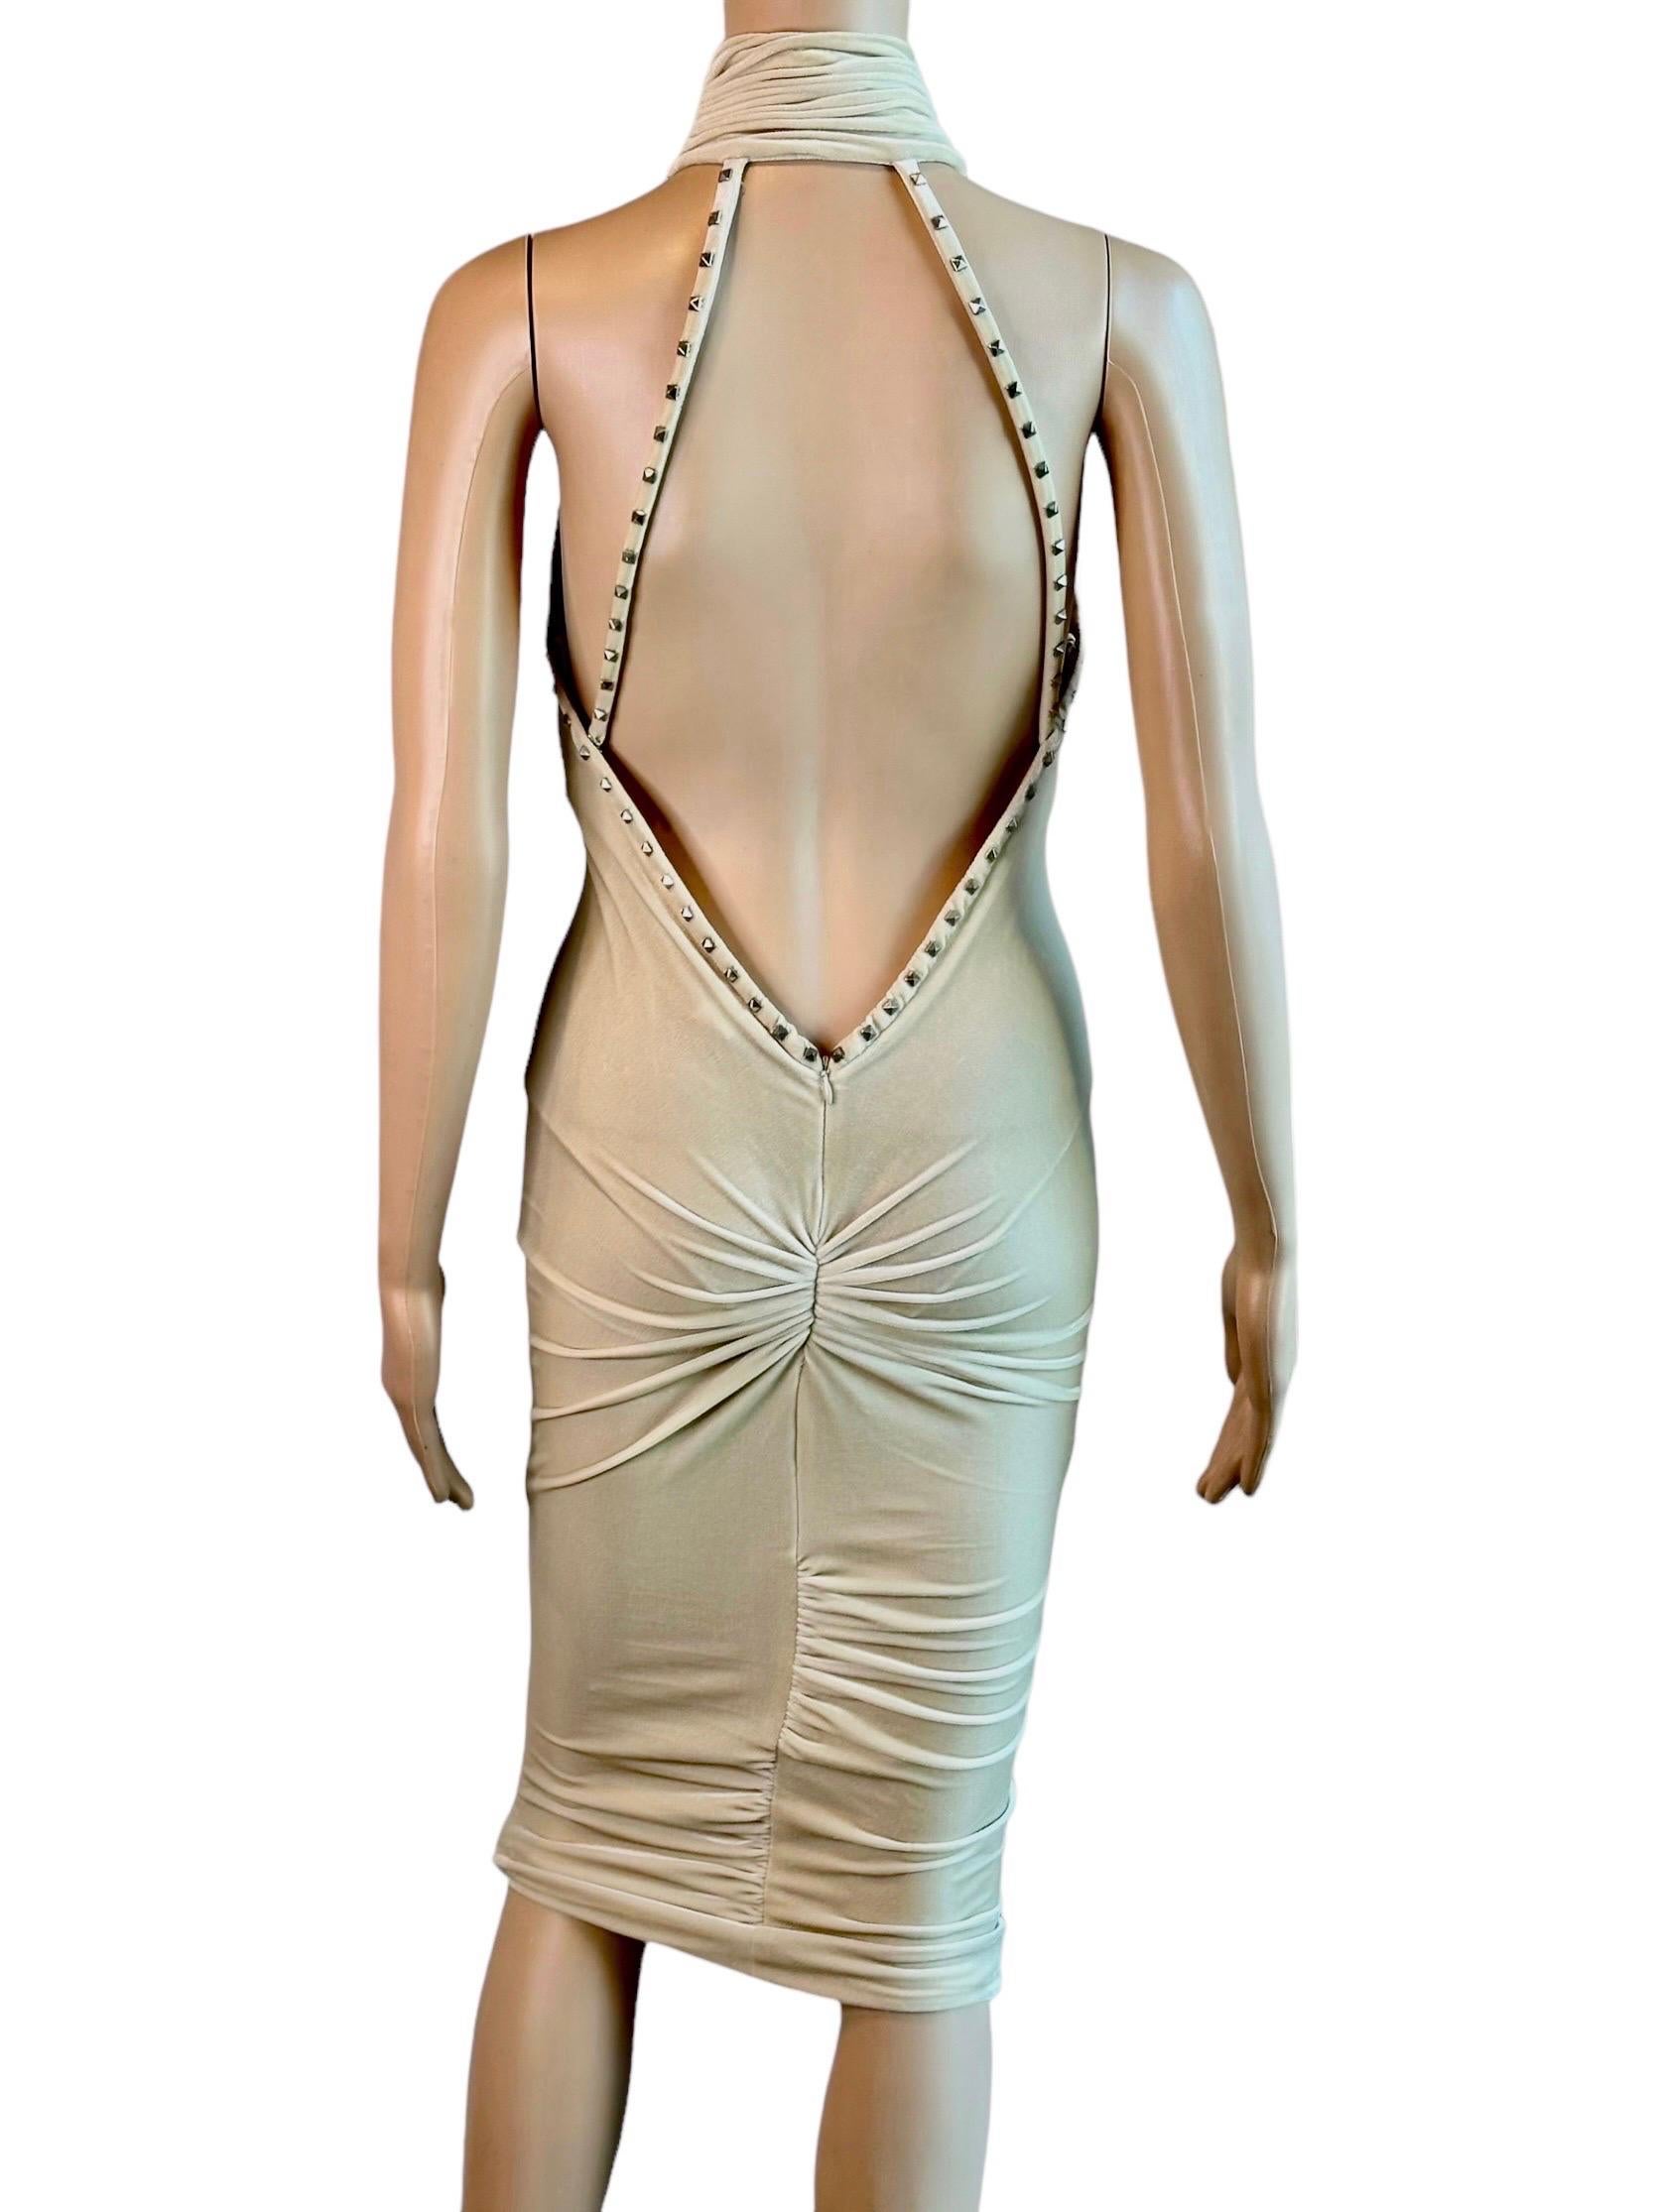 Versace F/W 2004 Runway Unworn Plunging Keyhole Cutout Back Studded Detail Dress For Sale 5